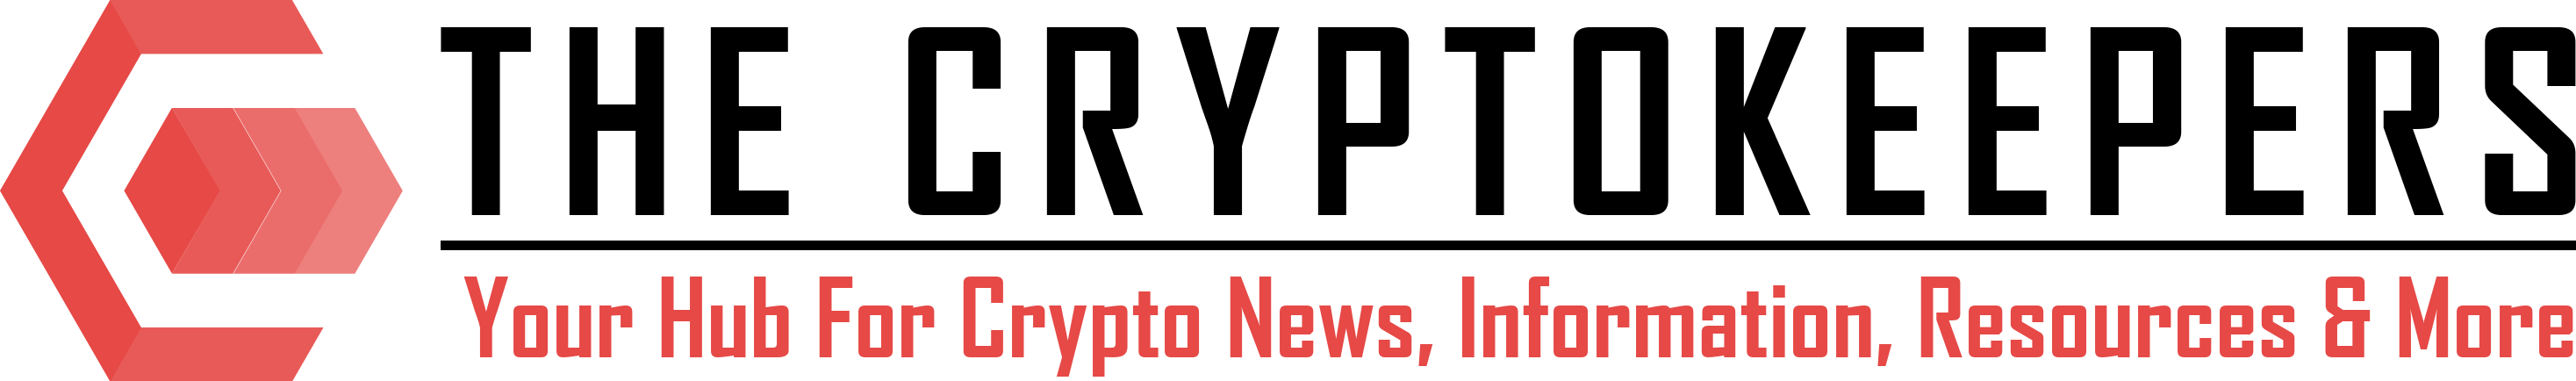 The Cryptokeepers Logo